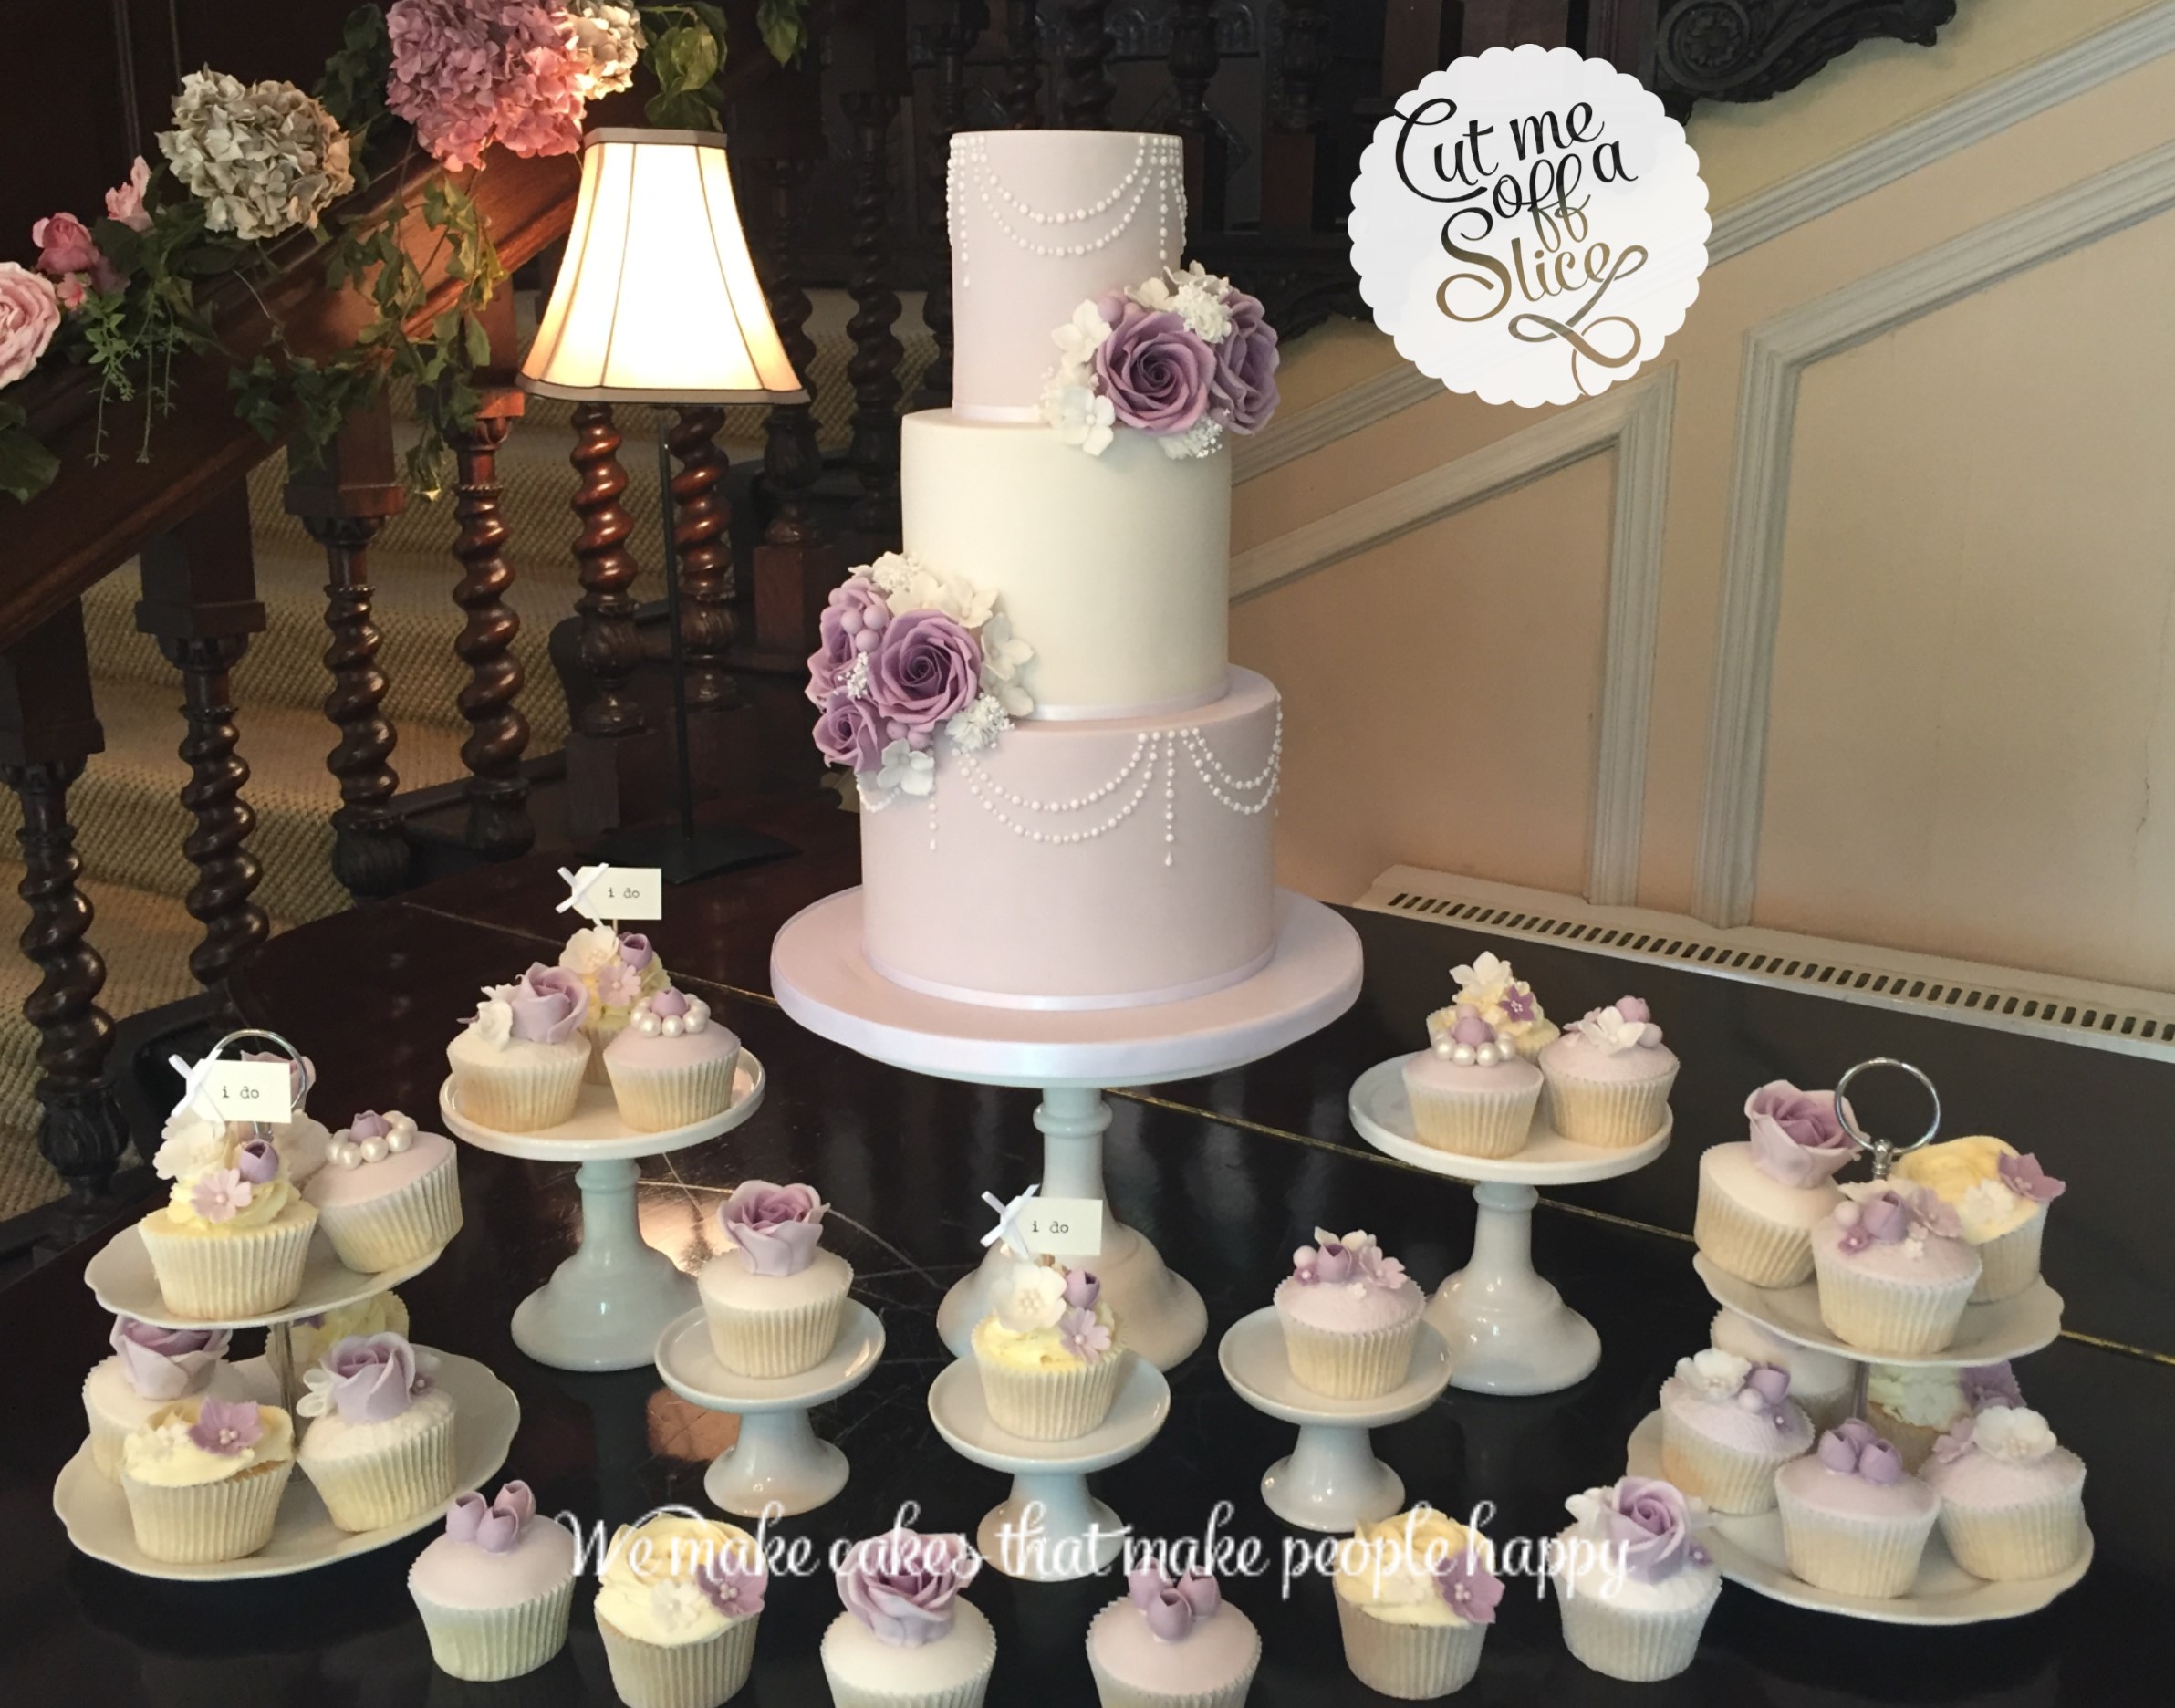 Cake Tables - Wedding Cakes , Cut me off a slice, the cake makers for Devon and Cornwall